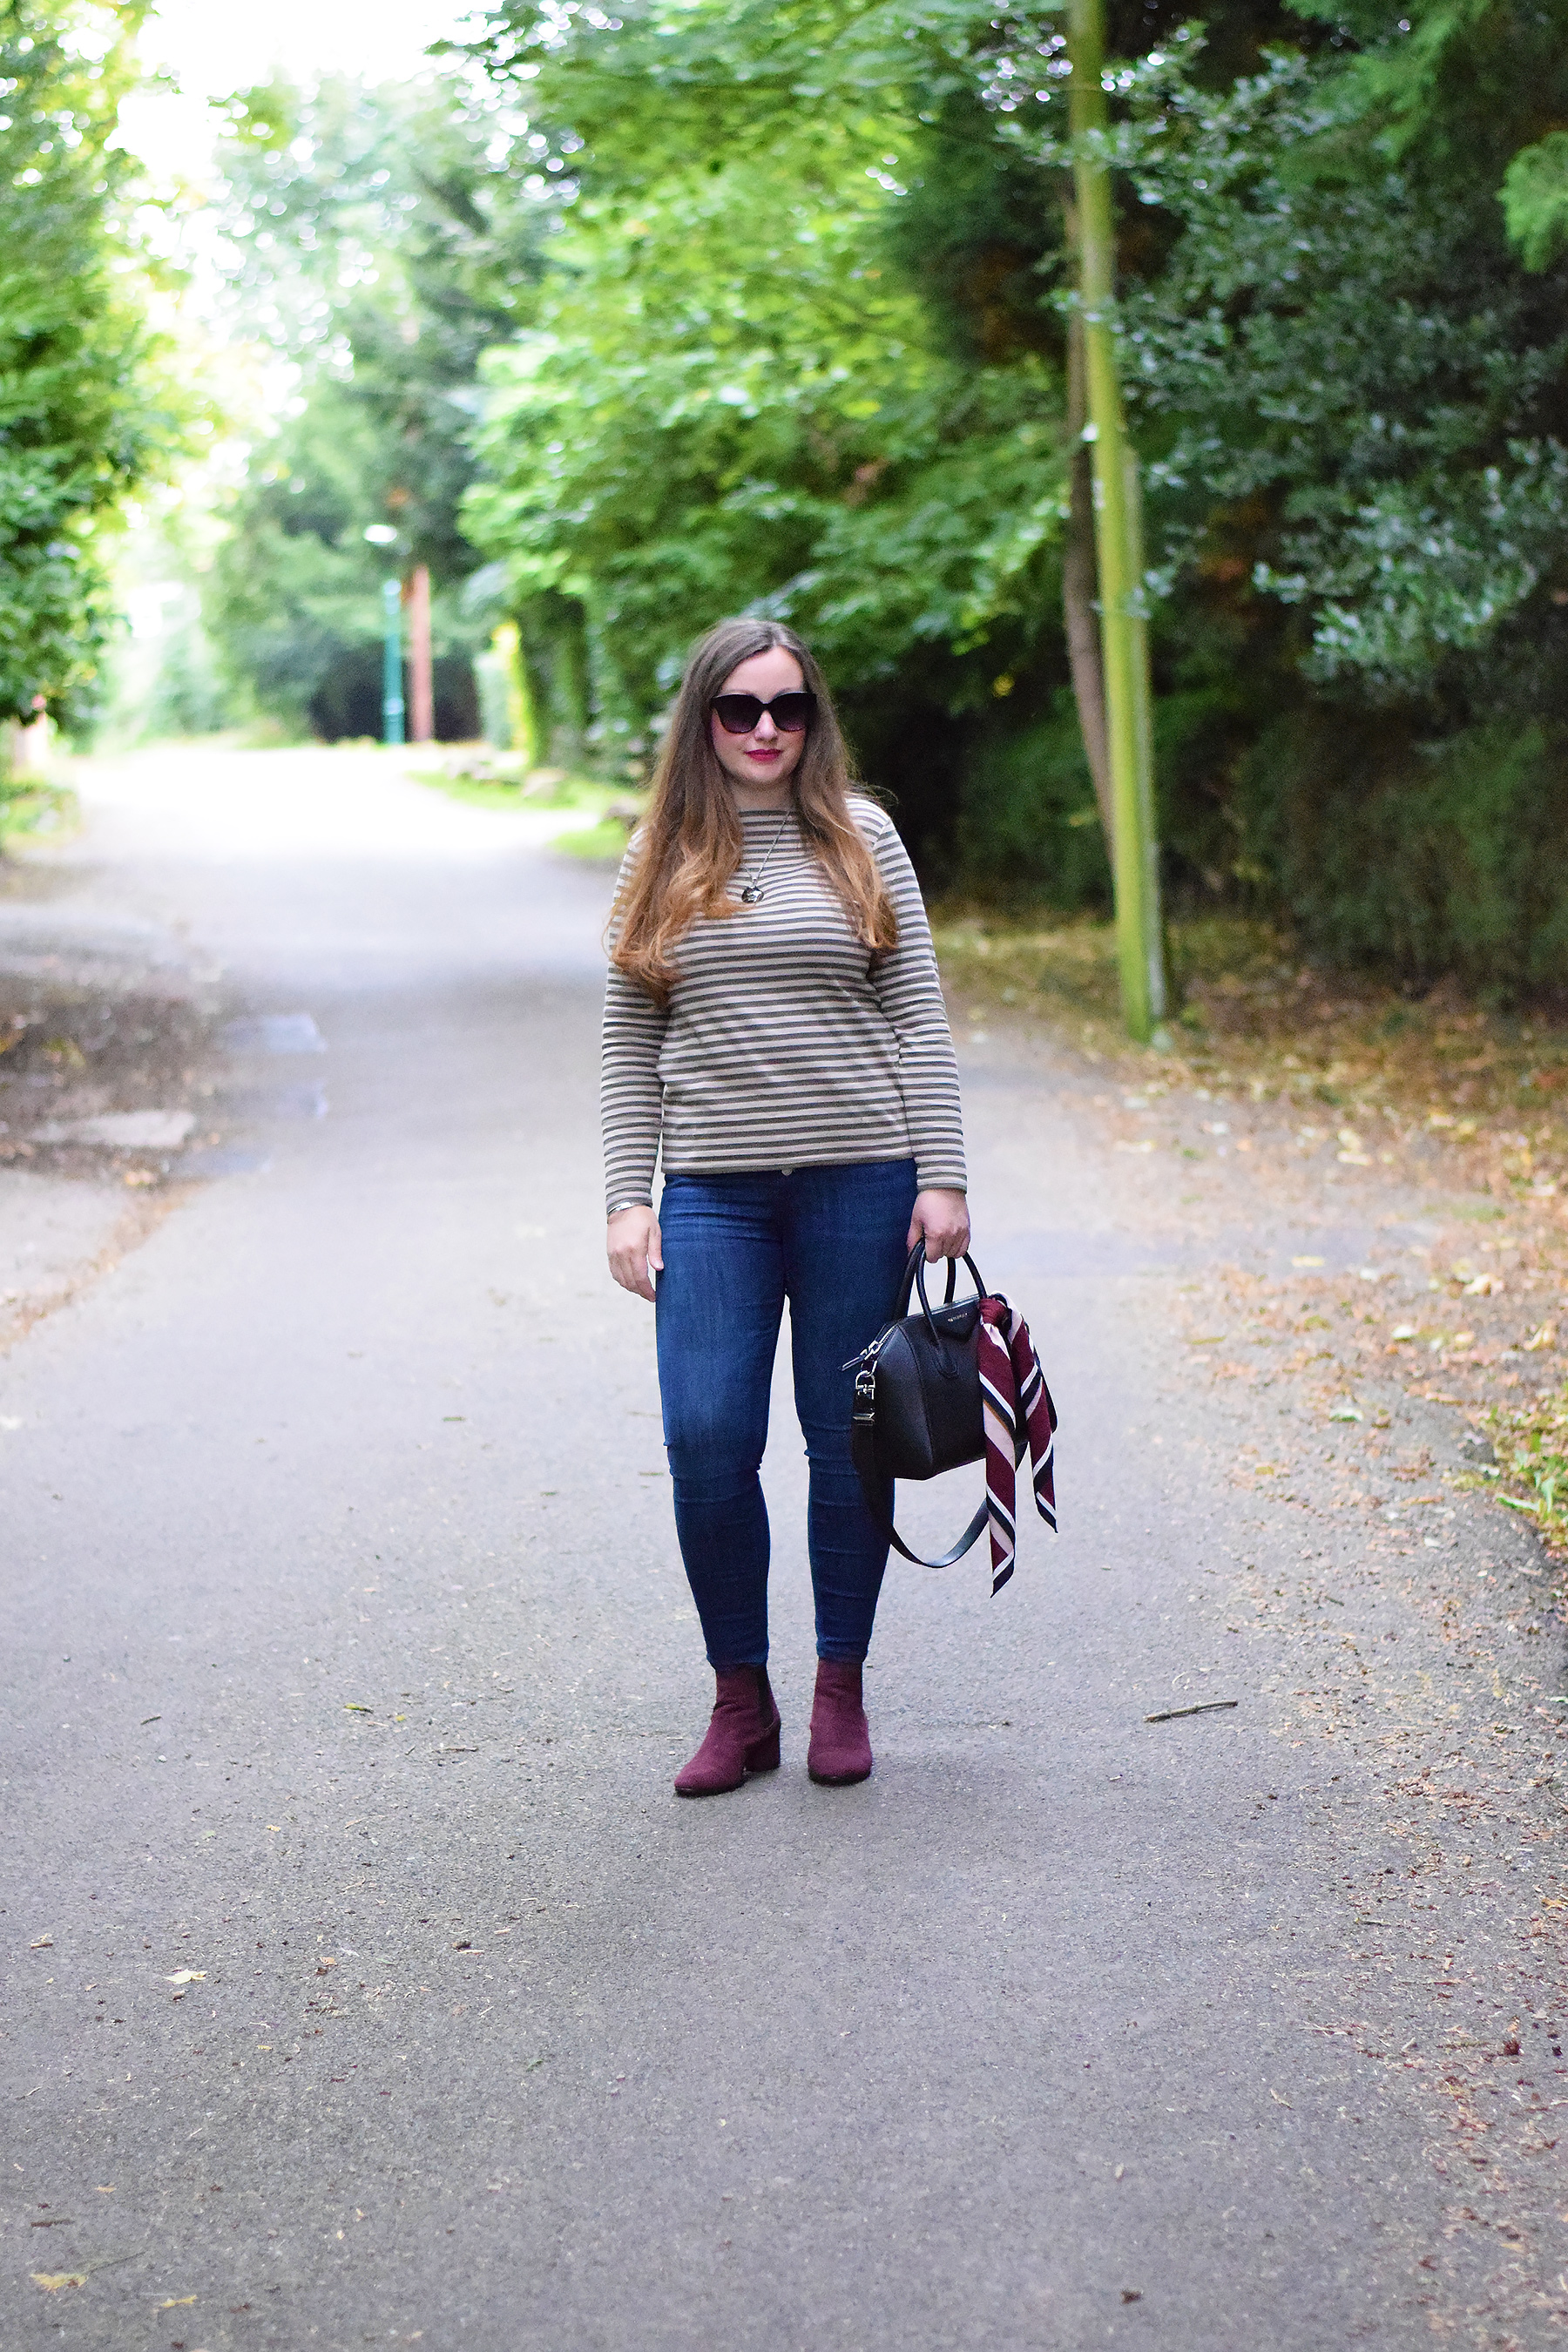 Khaki and grey striped breton top with dark wash skinny jeans and burgundy accessories